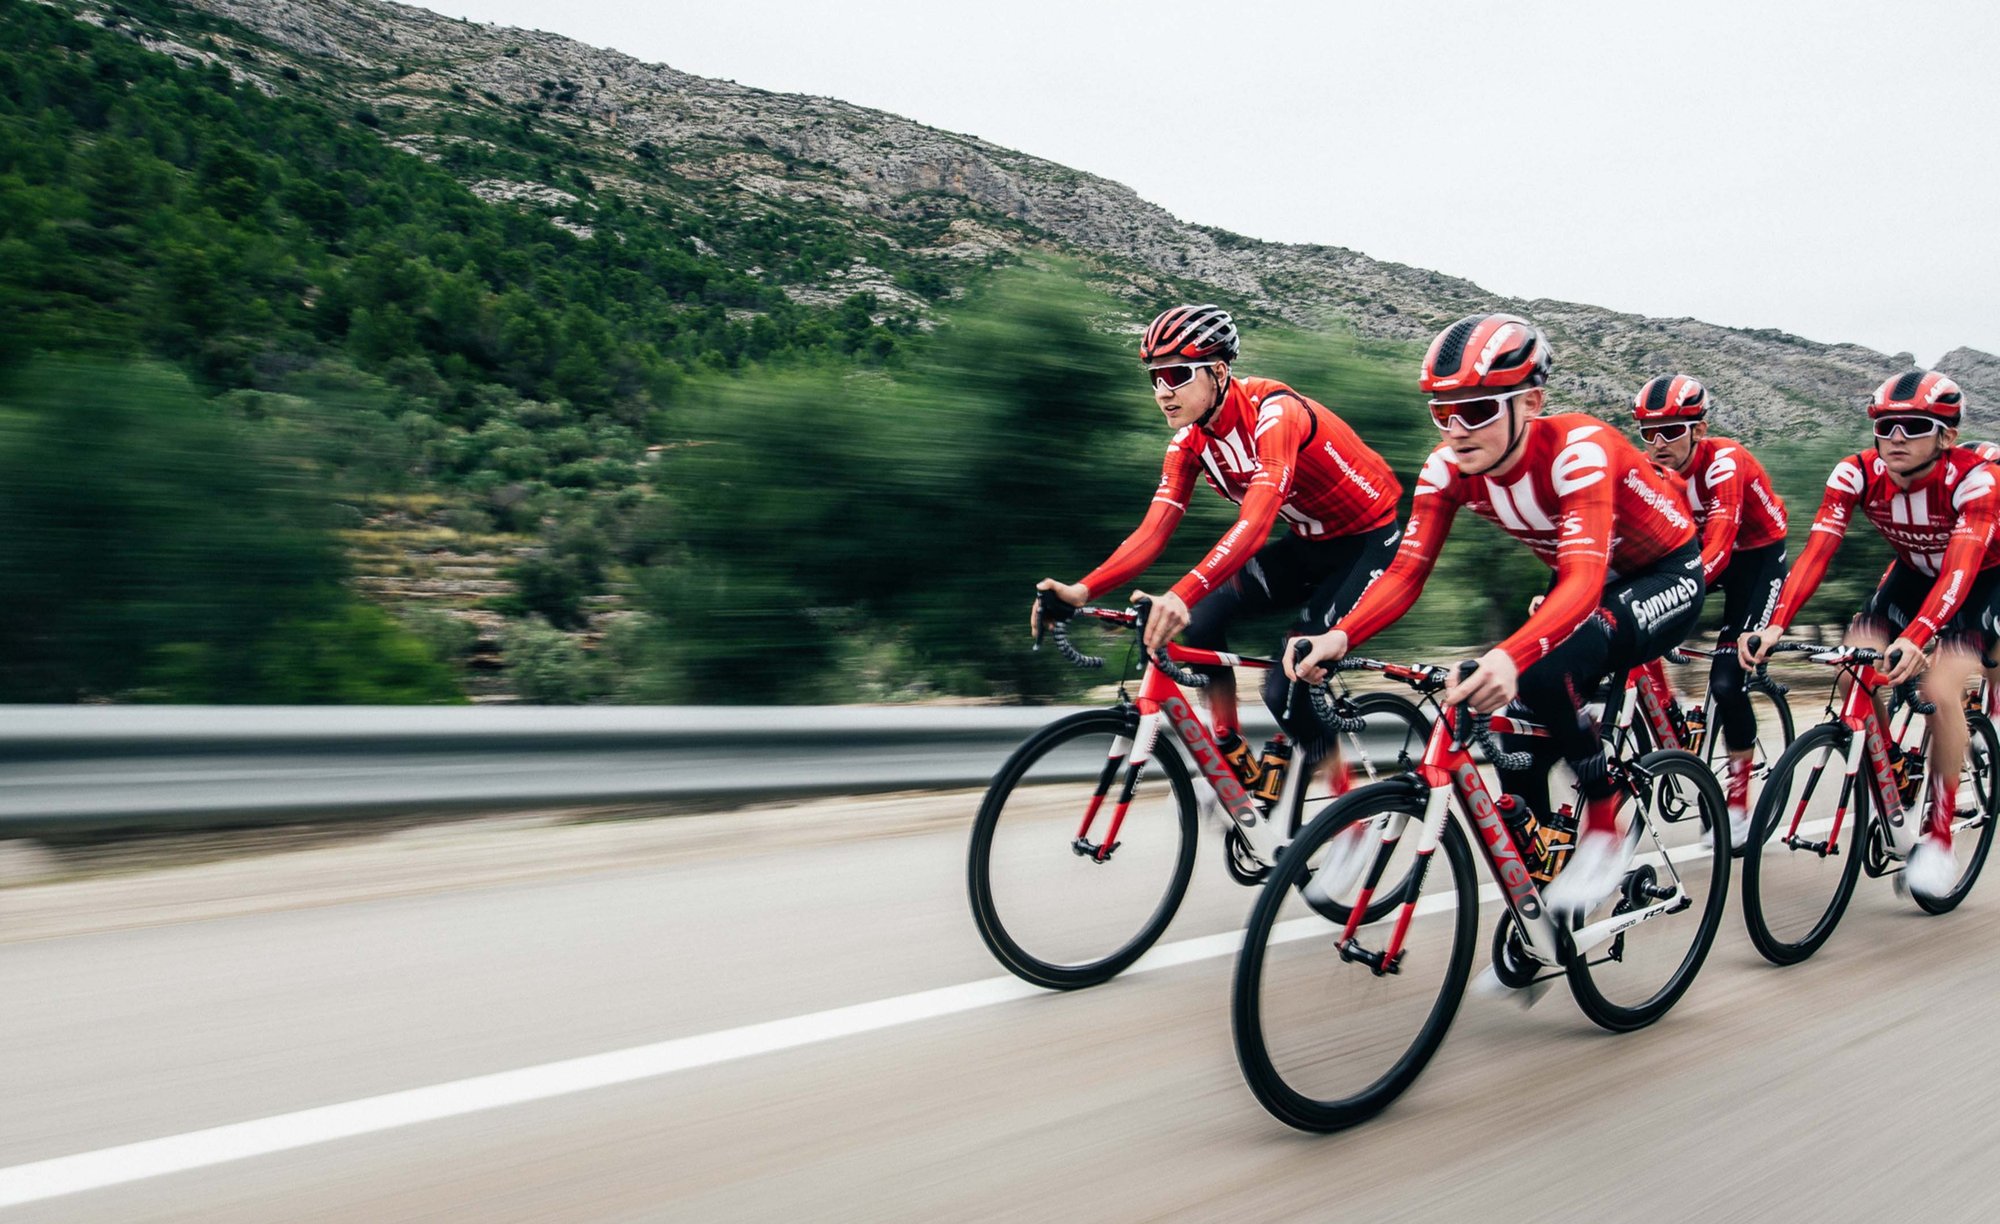 Cyclists Team Sunweb in action